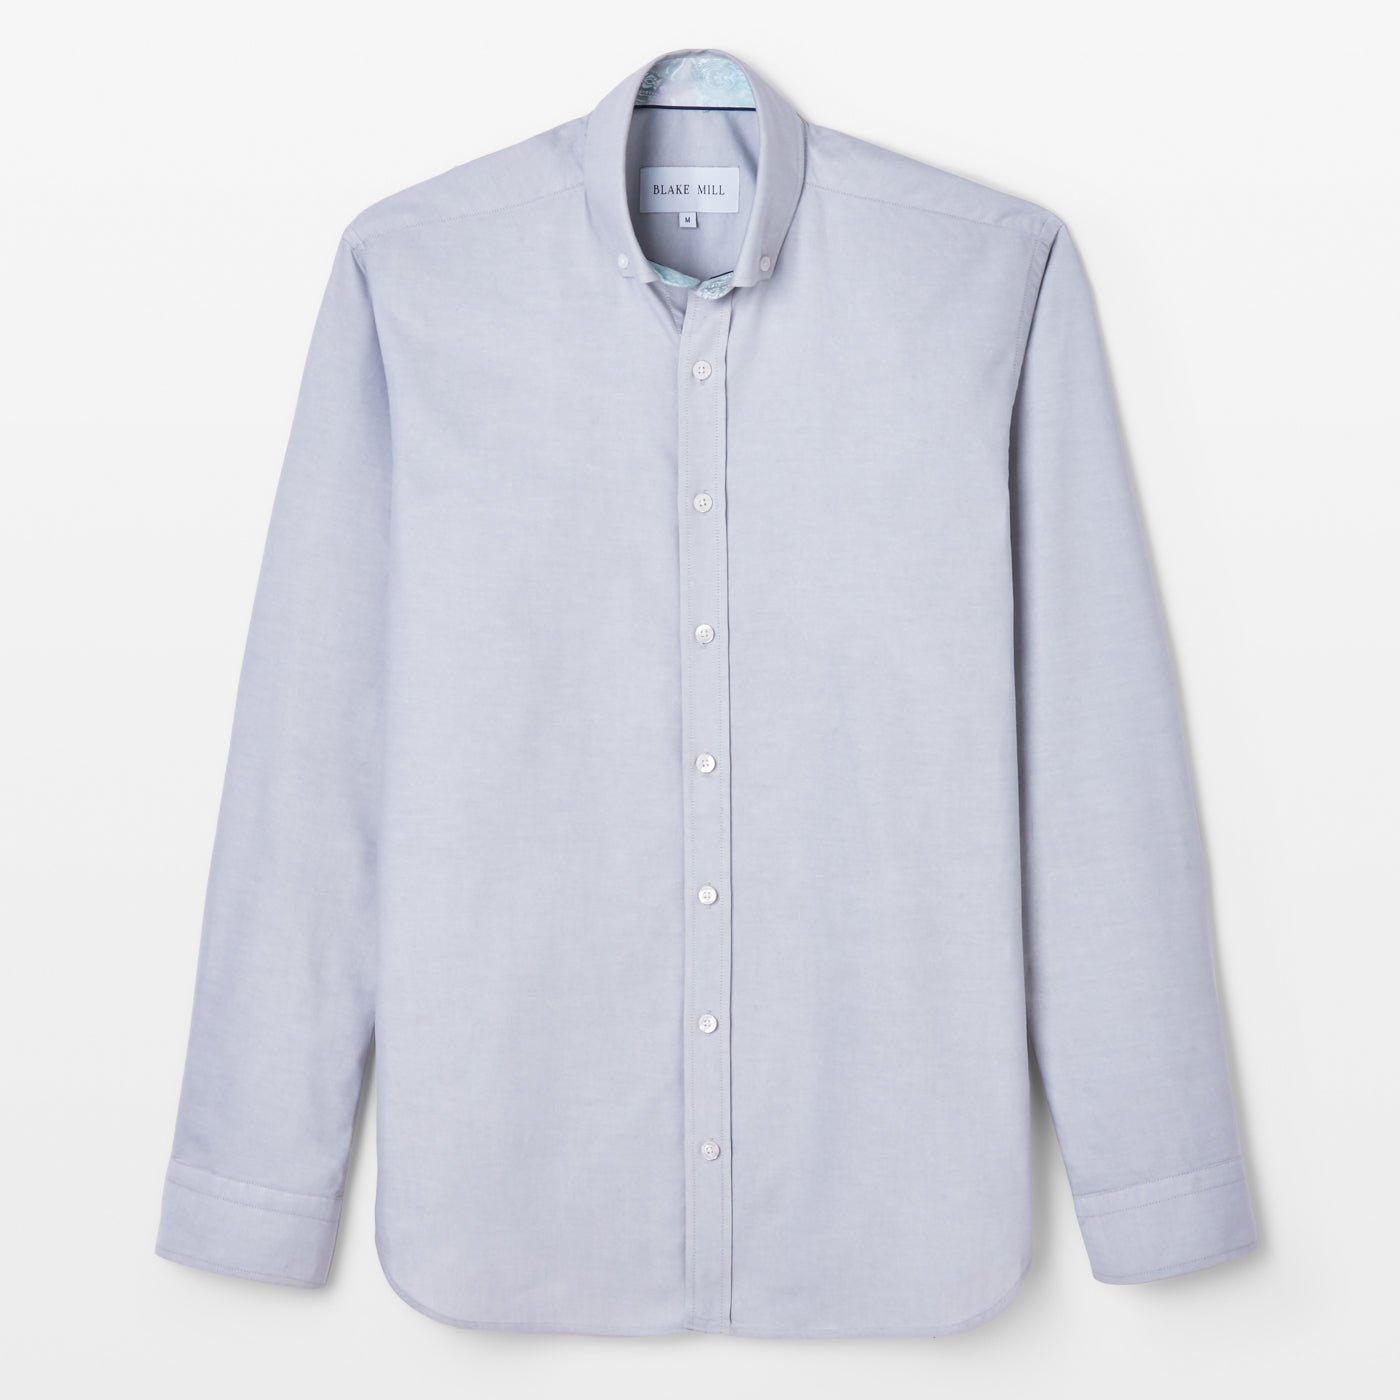 Grey Oxford with Oriental Paisley Accents Button-Down Shirt - Blake Mill